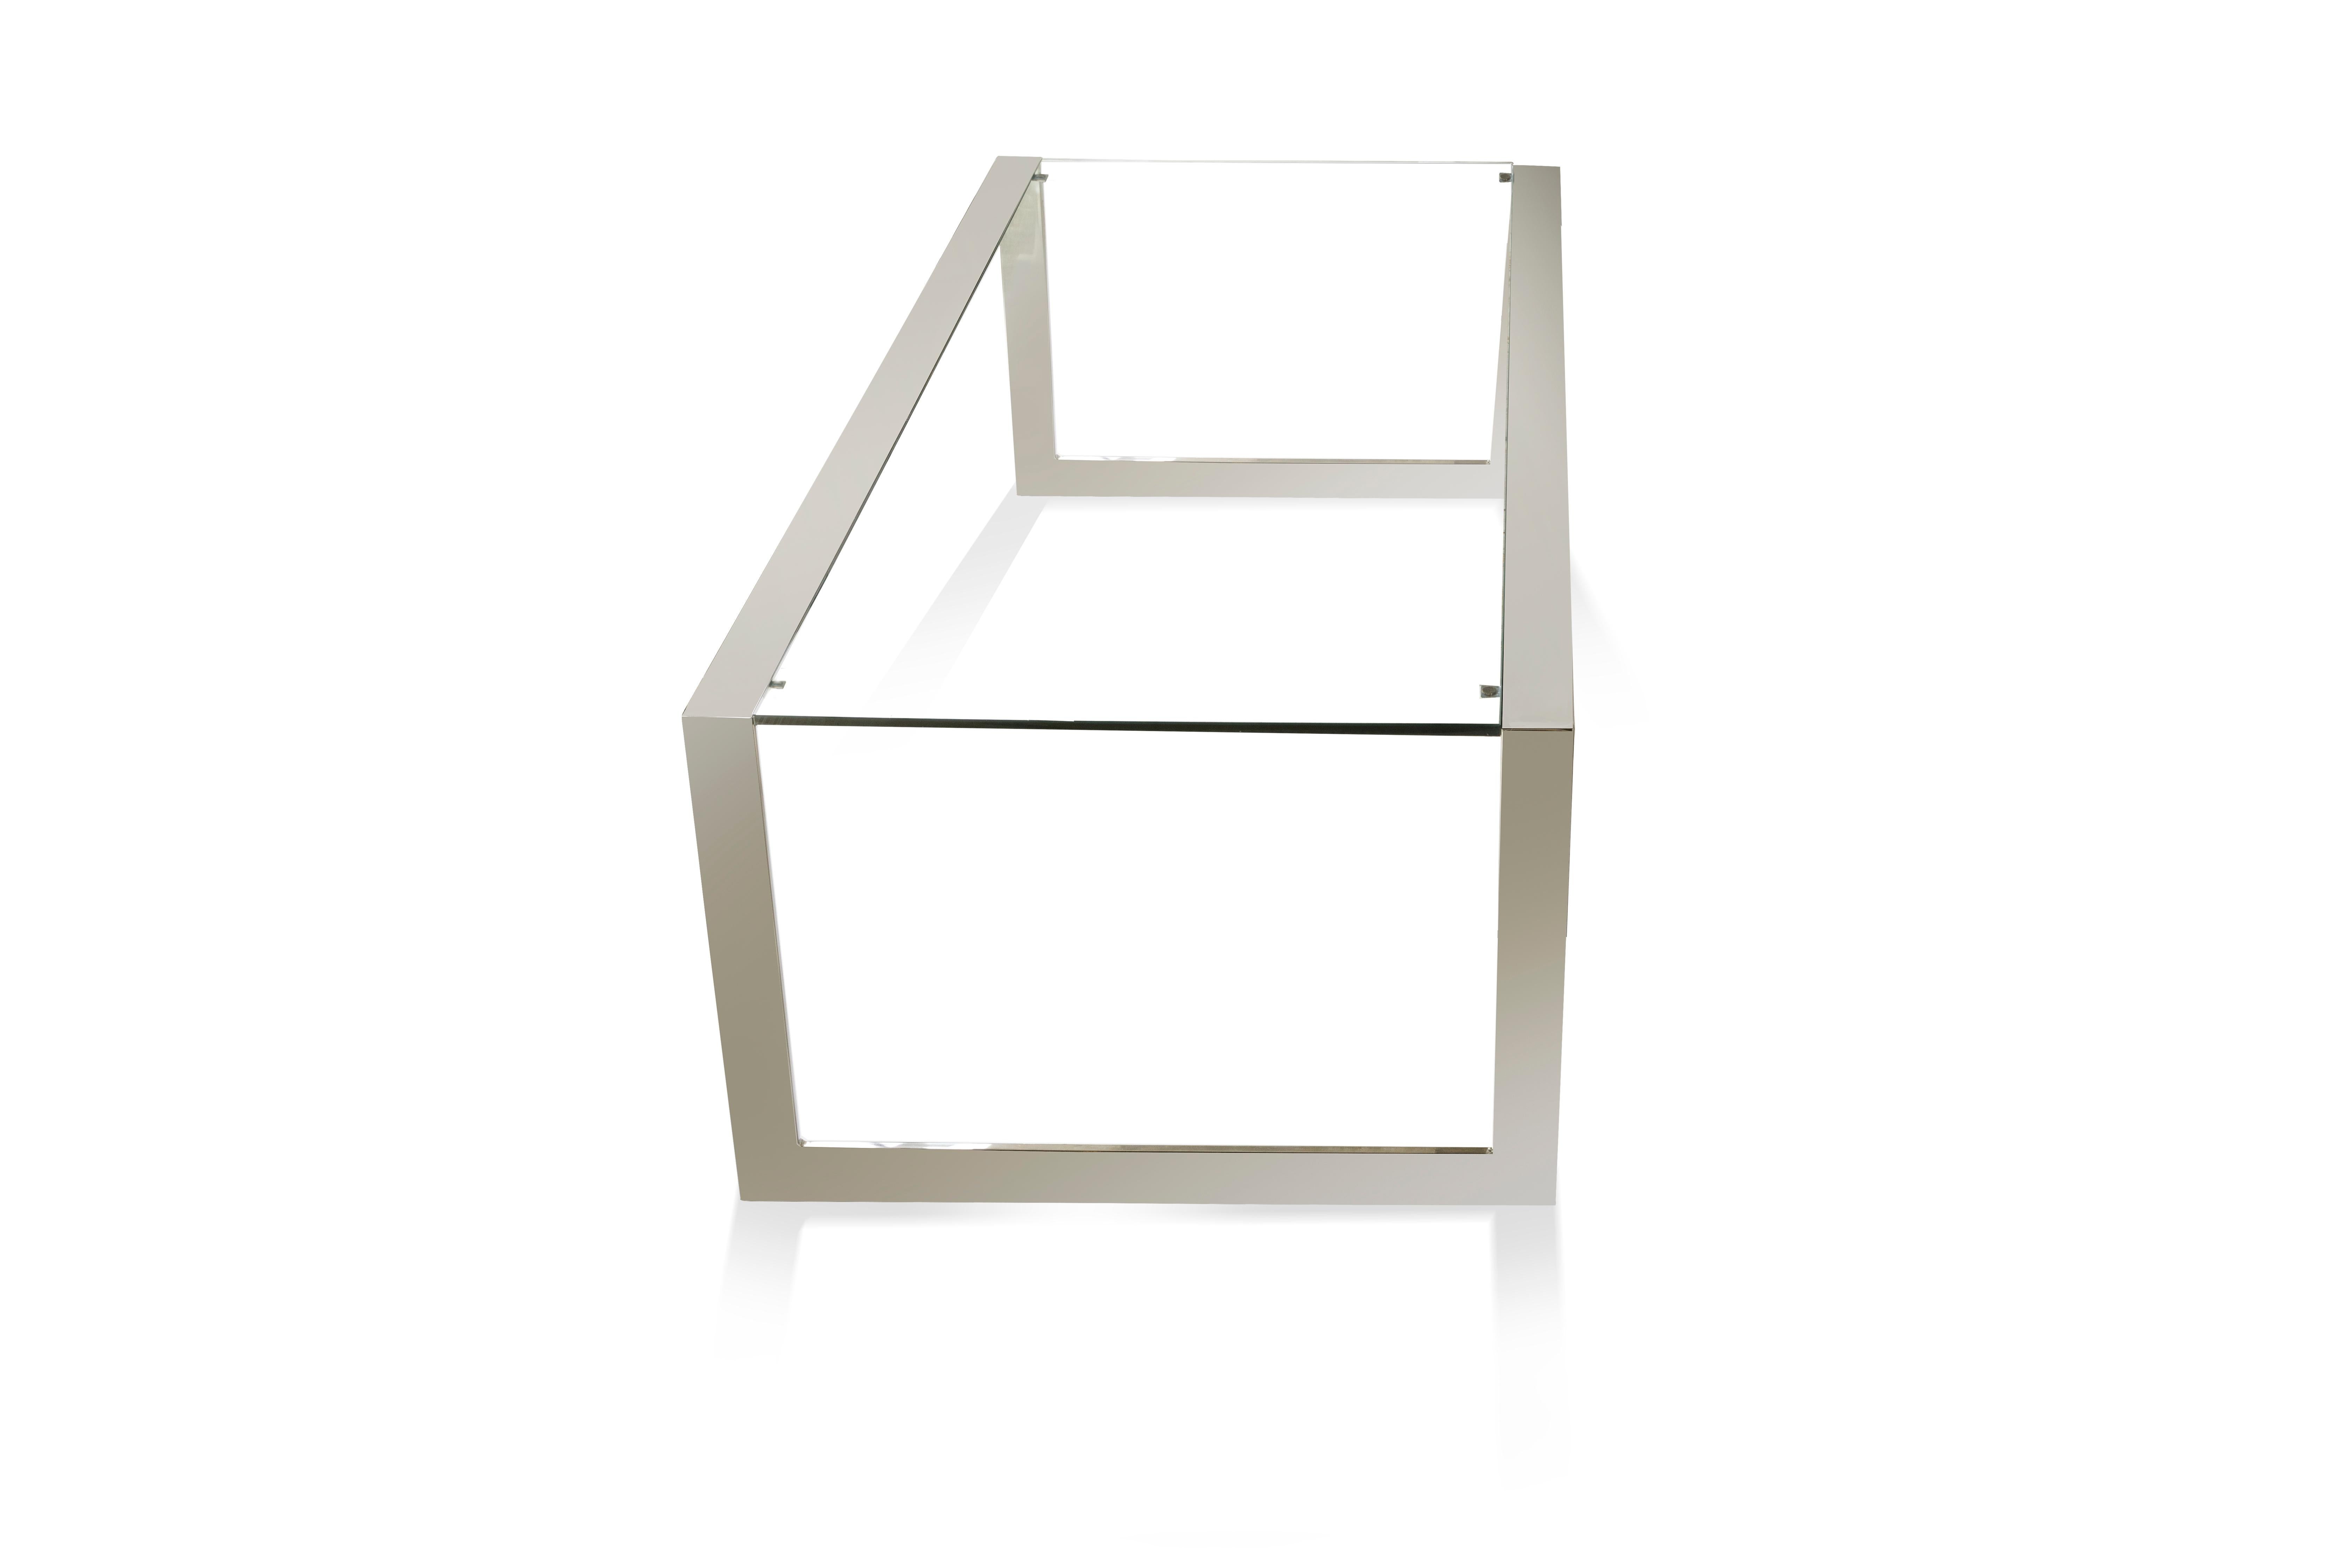 BARCELONA is a coffee table made in stainless steel and glass. The thin metal tracks are seamlessly connected and define the very clean shape of this contemporary coffee table. The glass can be clear or in any other shades to blend into the